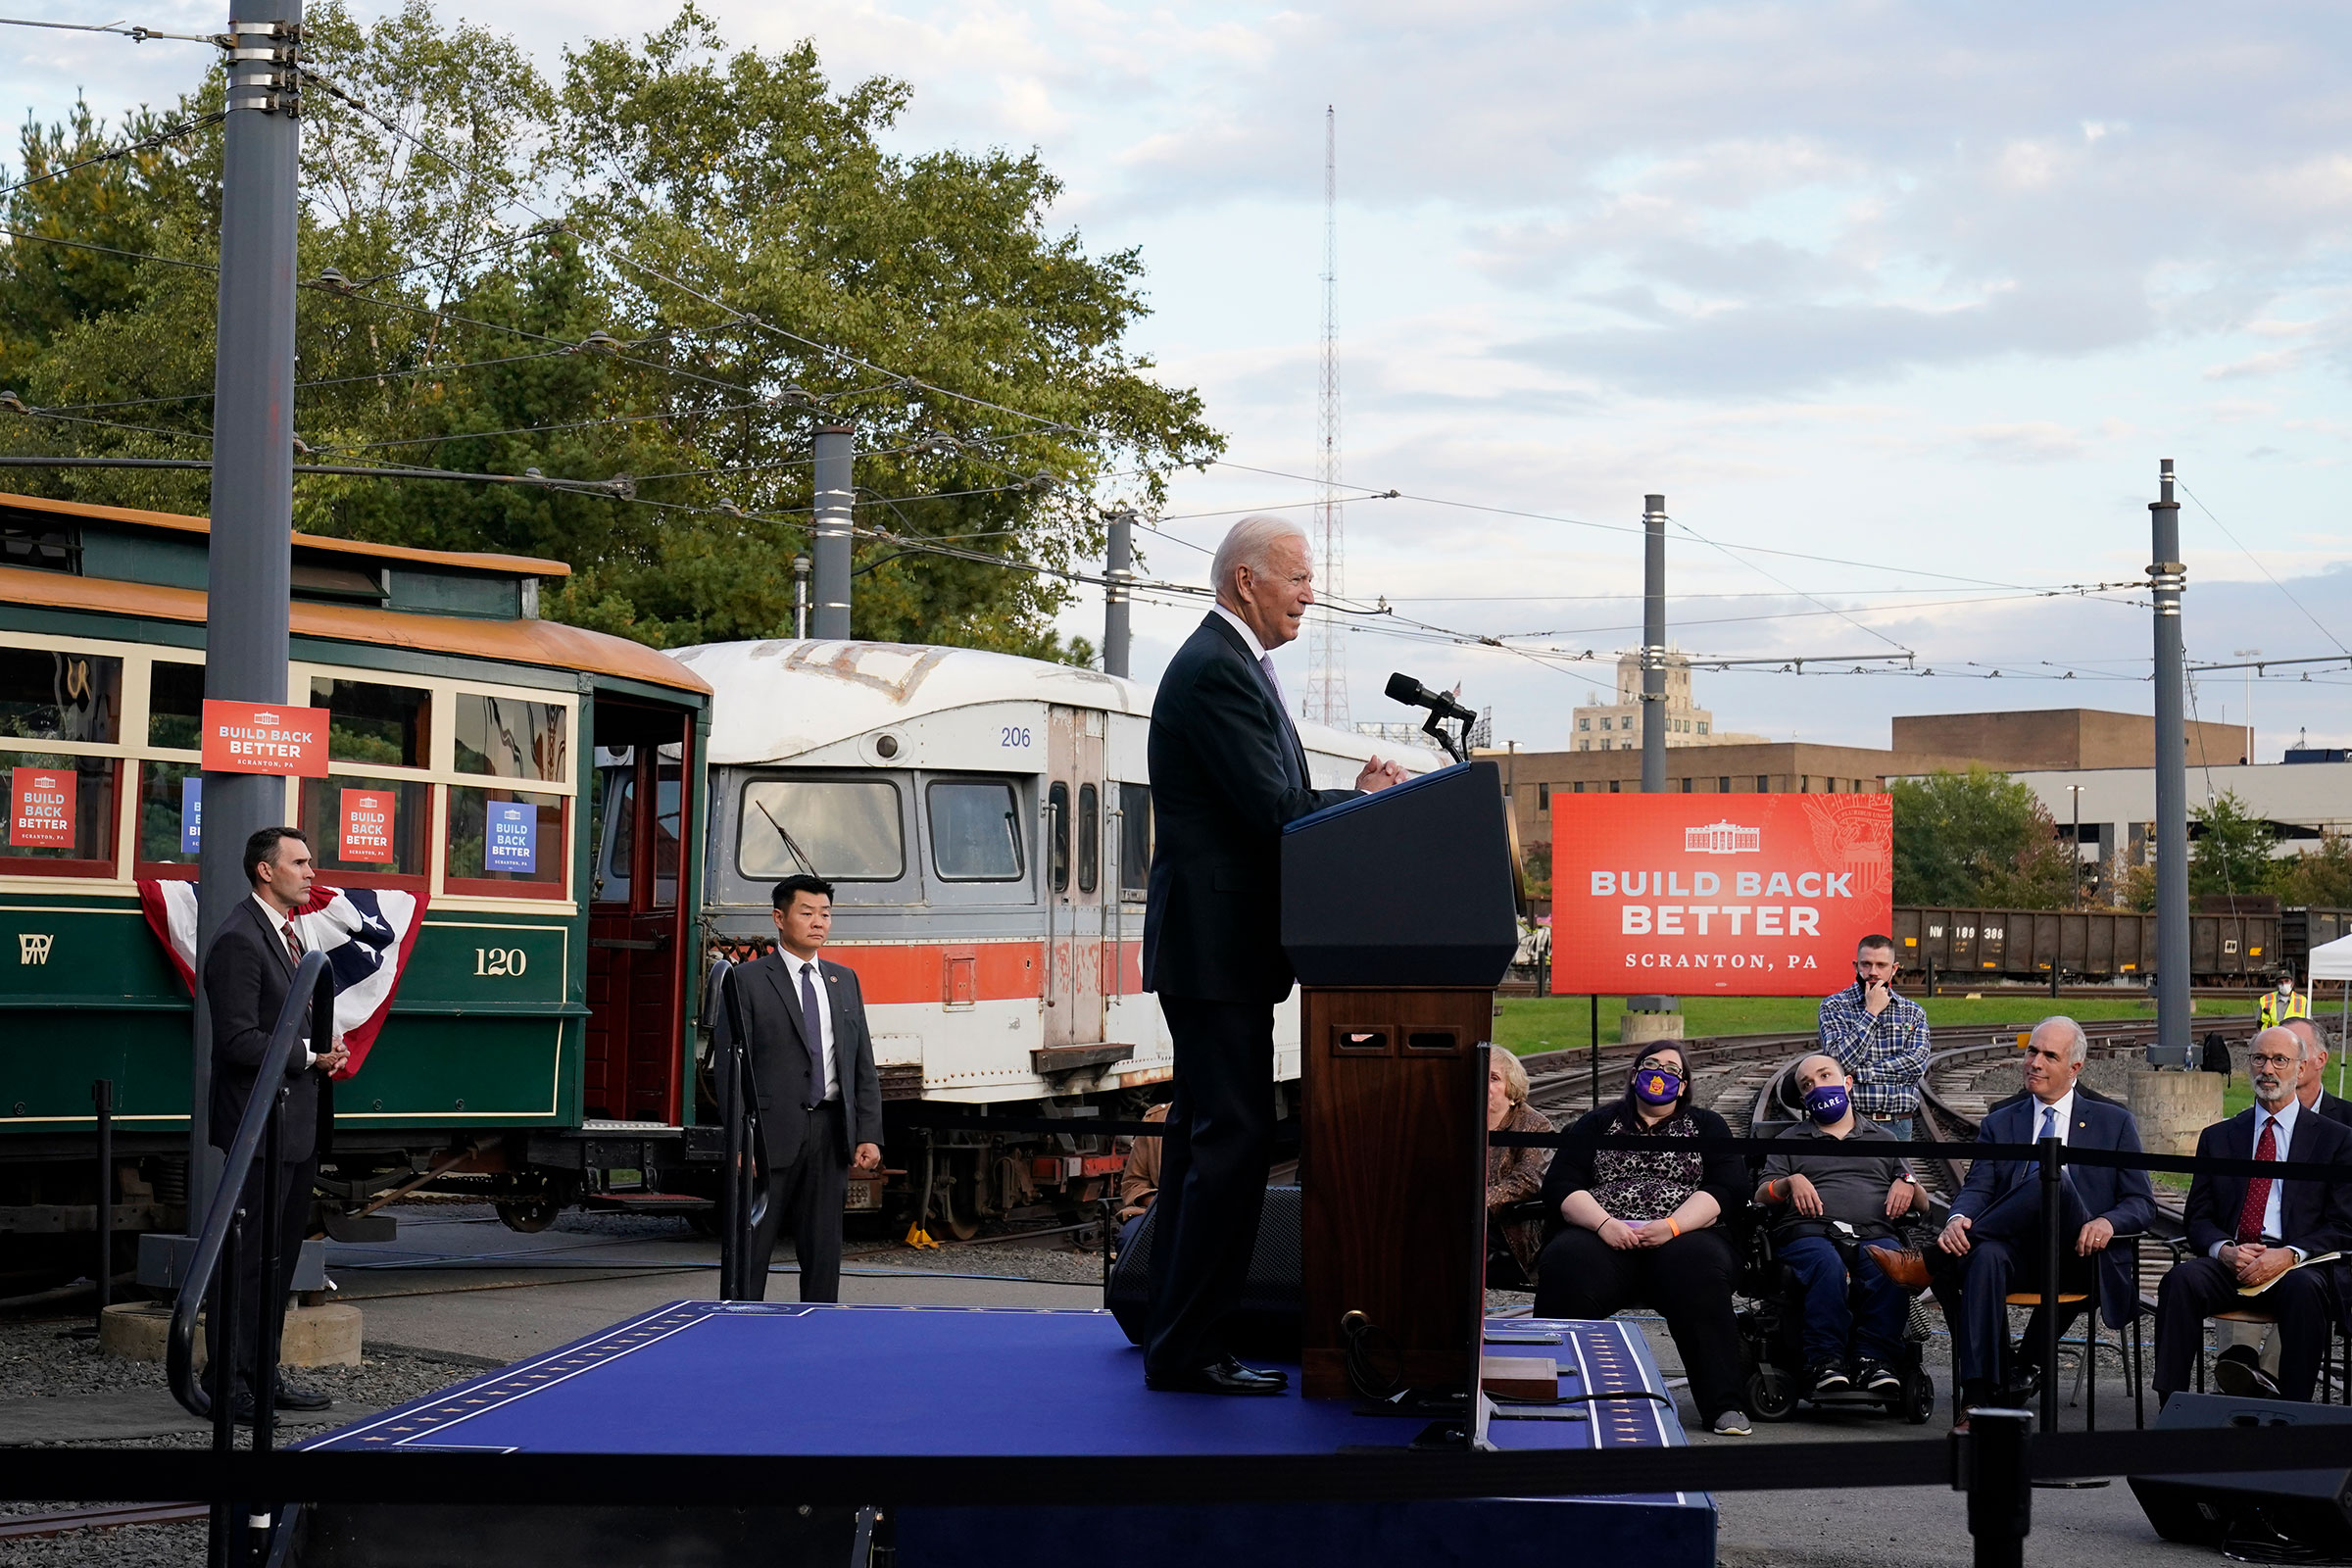 President Joe Biden speaks about his infrastructure plan and his domestic agenda during a visit to the Electric City Trolley Museum in Scranton, Pa., on Oct. 20, 2021.